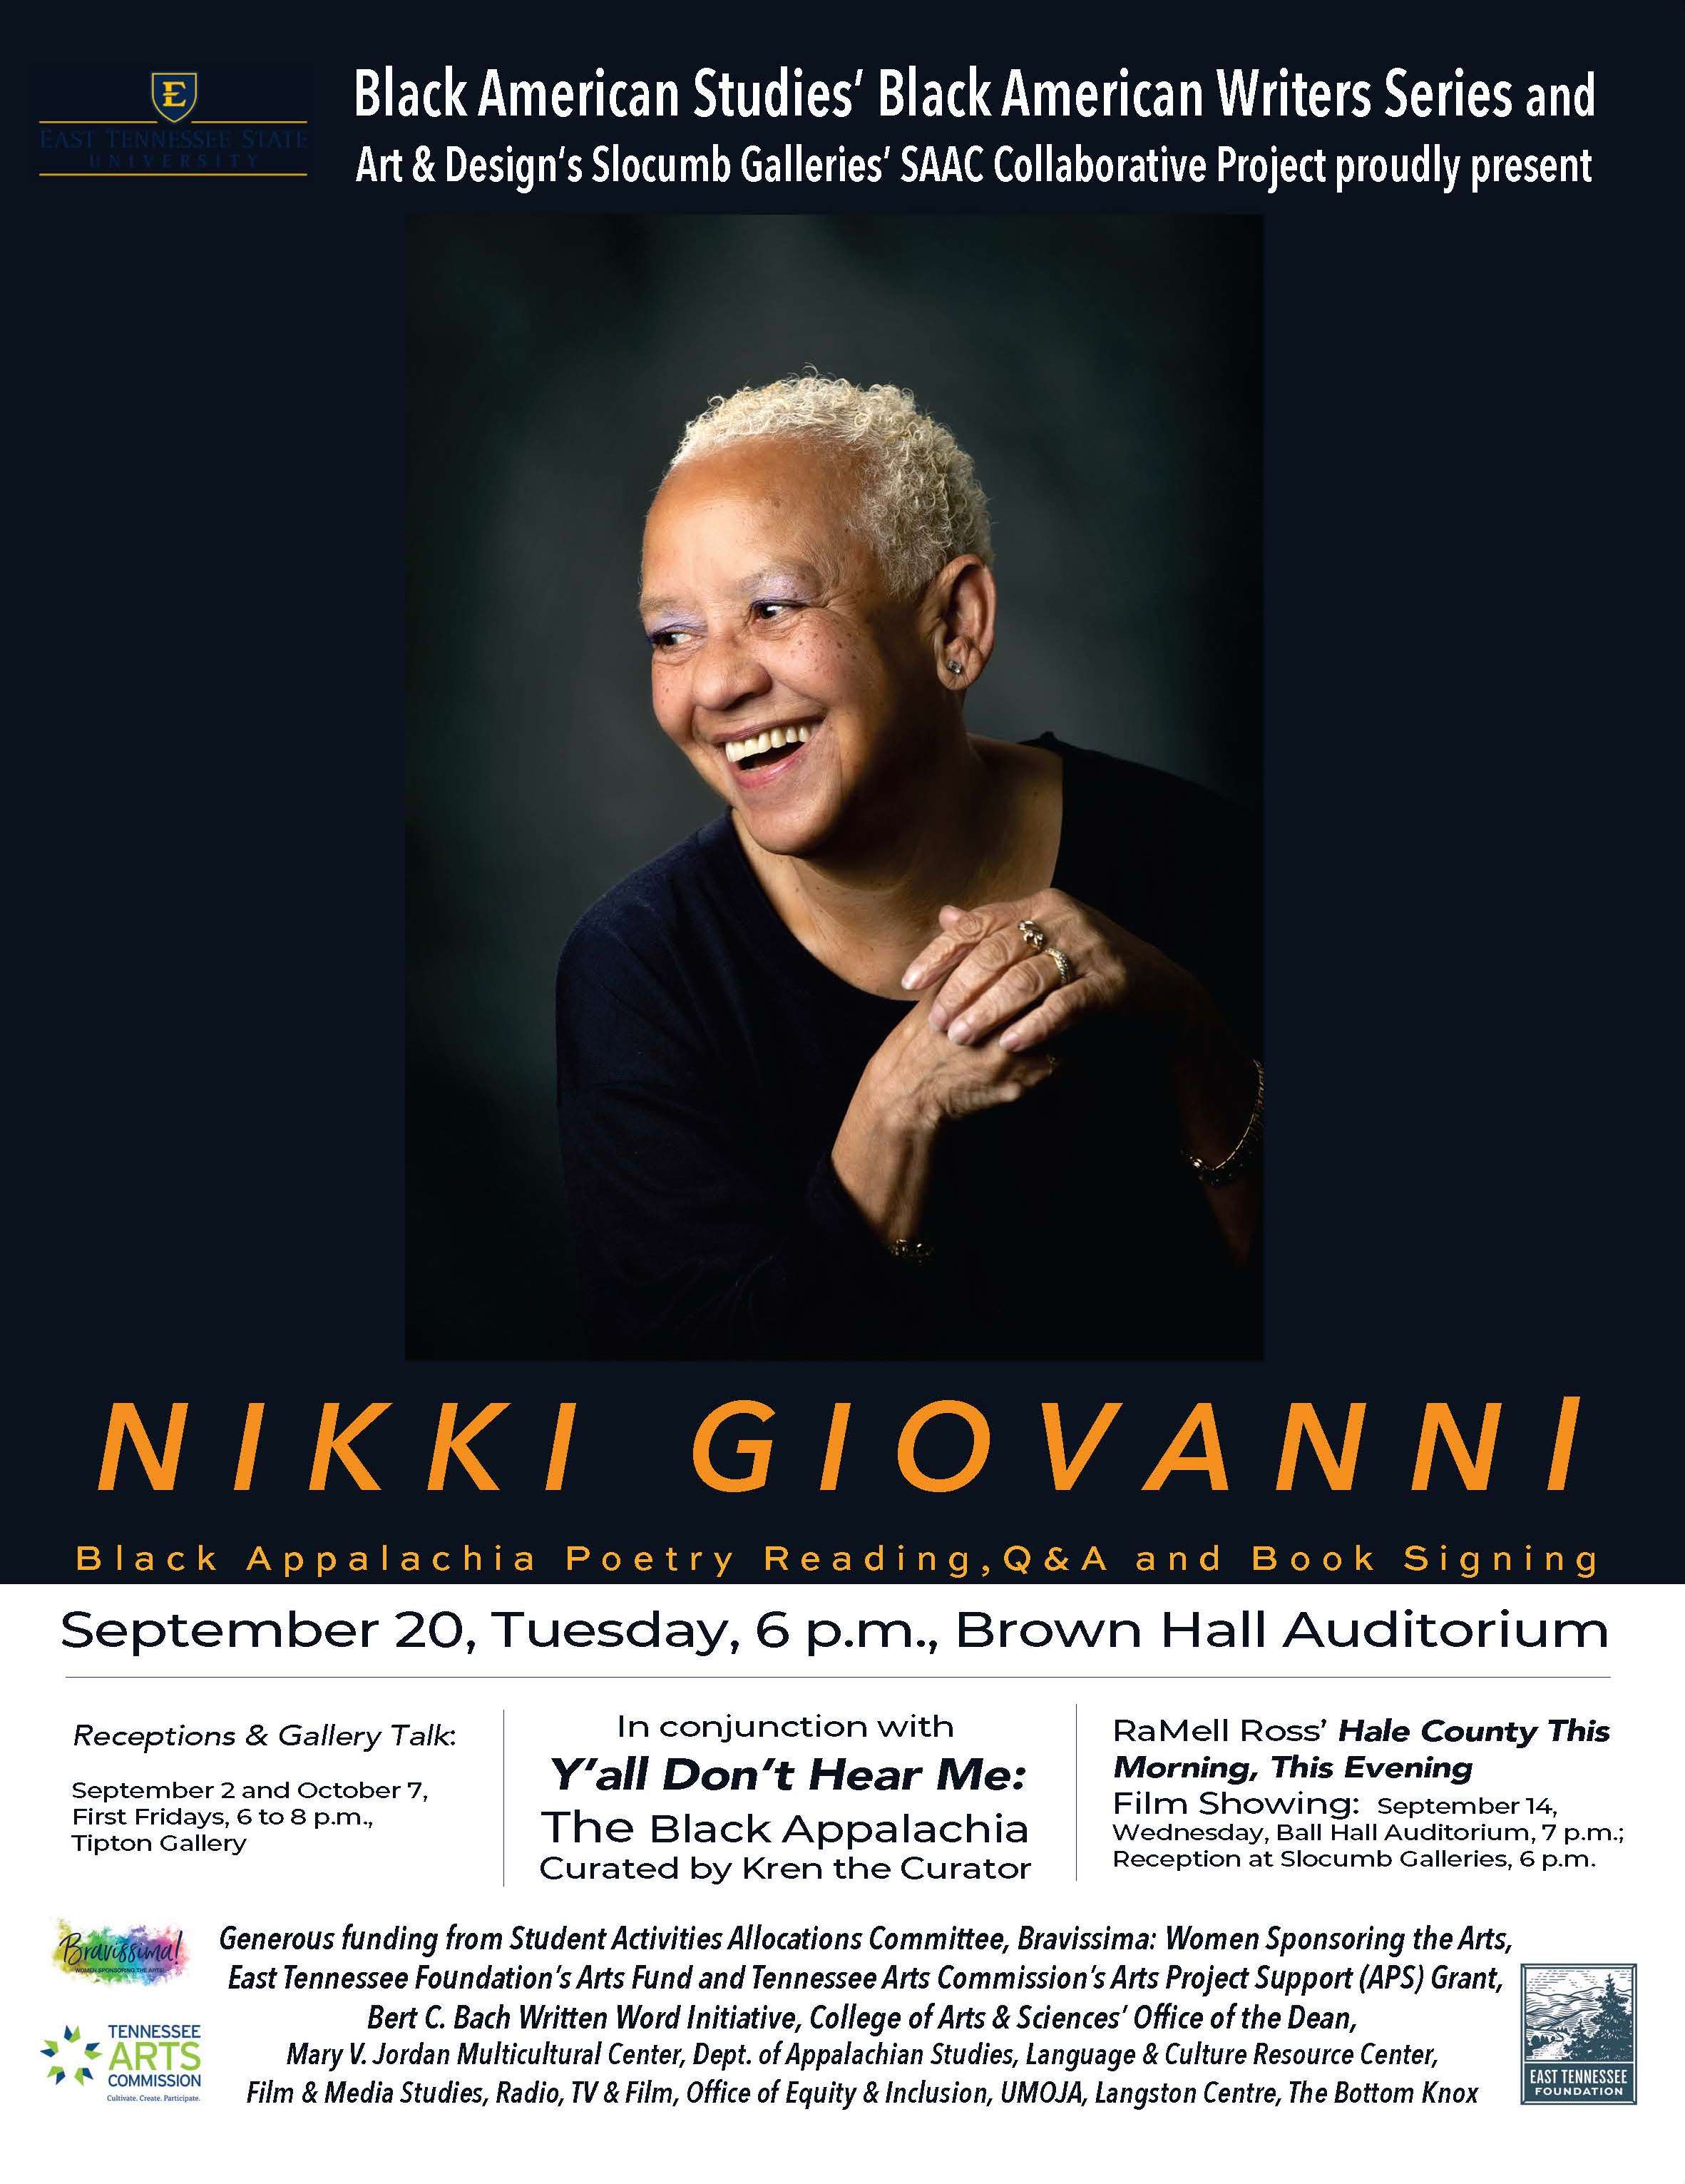 Nikki Giovanni Poster with event information detailed in the commentary above.